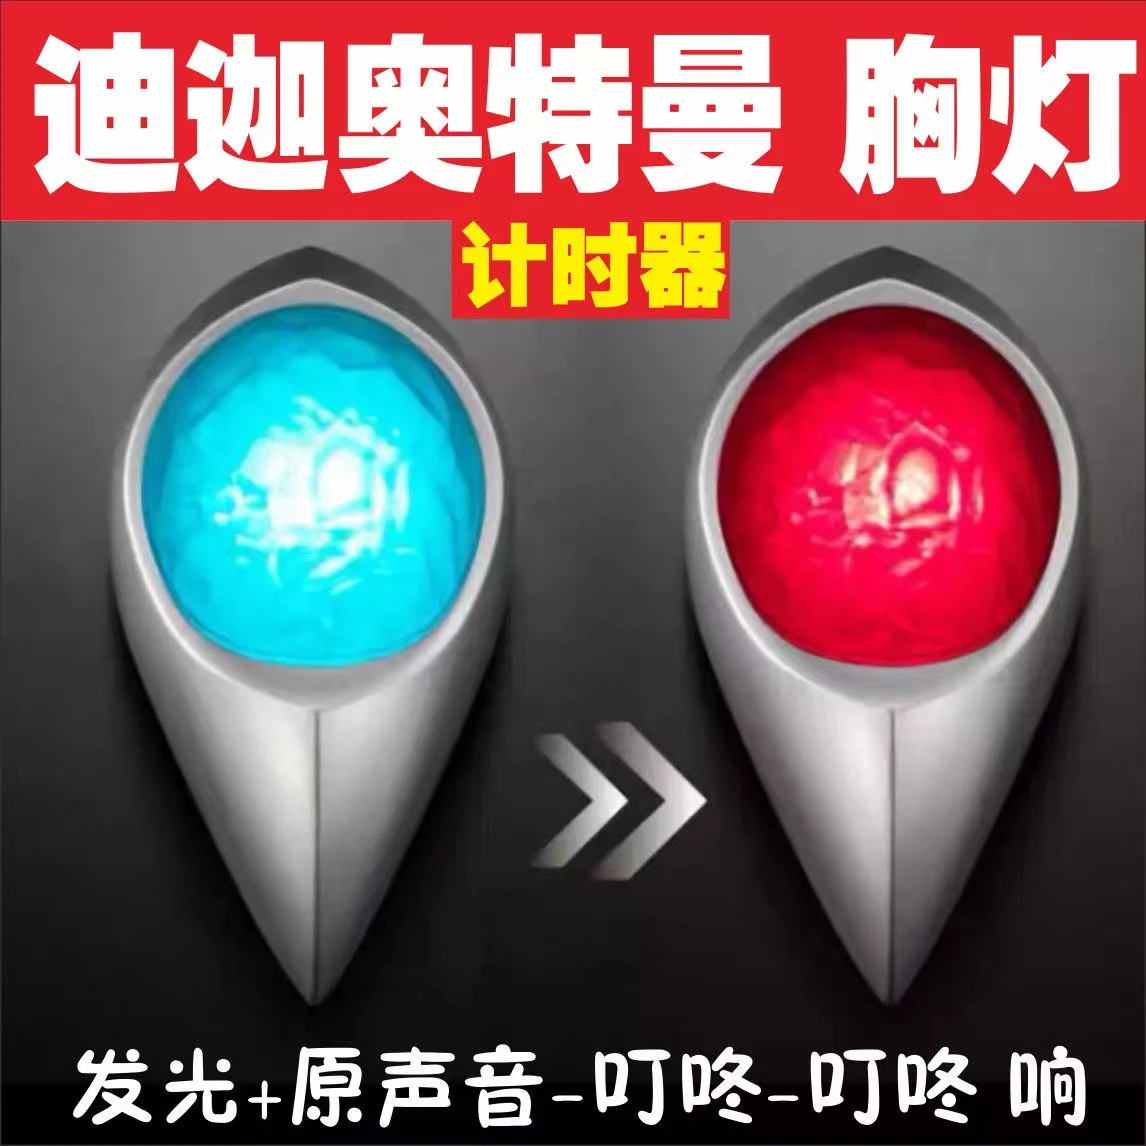 Sell Like Hot Ultraman Tiga Chest Lamp Original Sound Color Timer Beam Lamp Life Guage Power Timer Children's Acousto-optic Toys bumblebee transformer toy